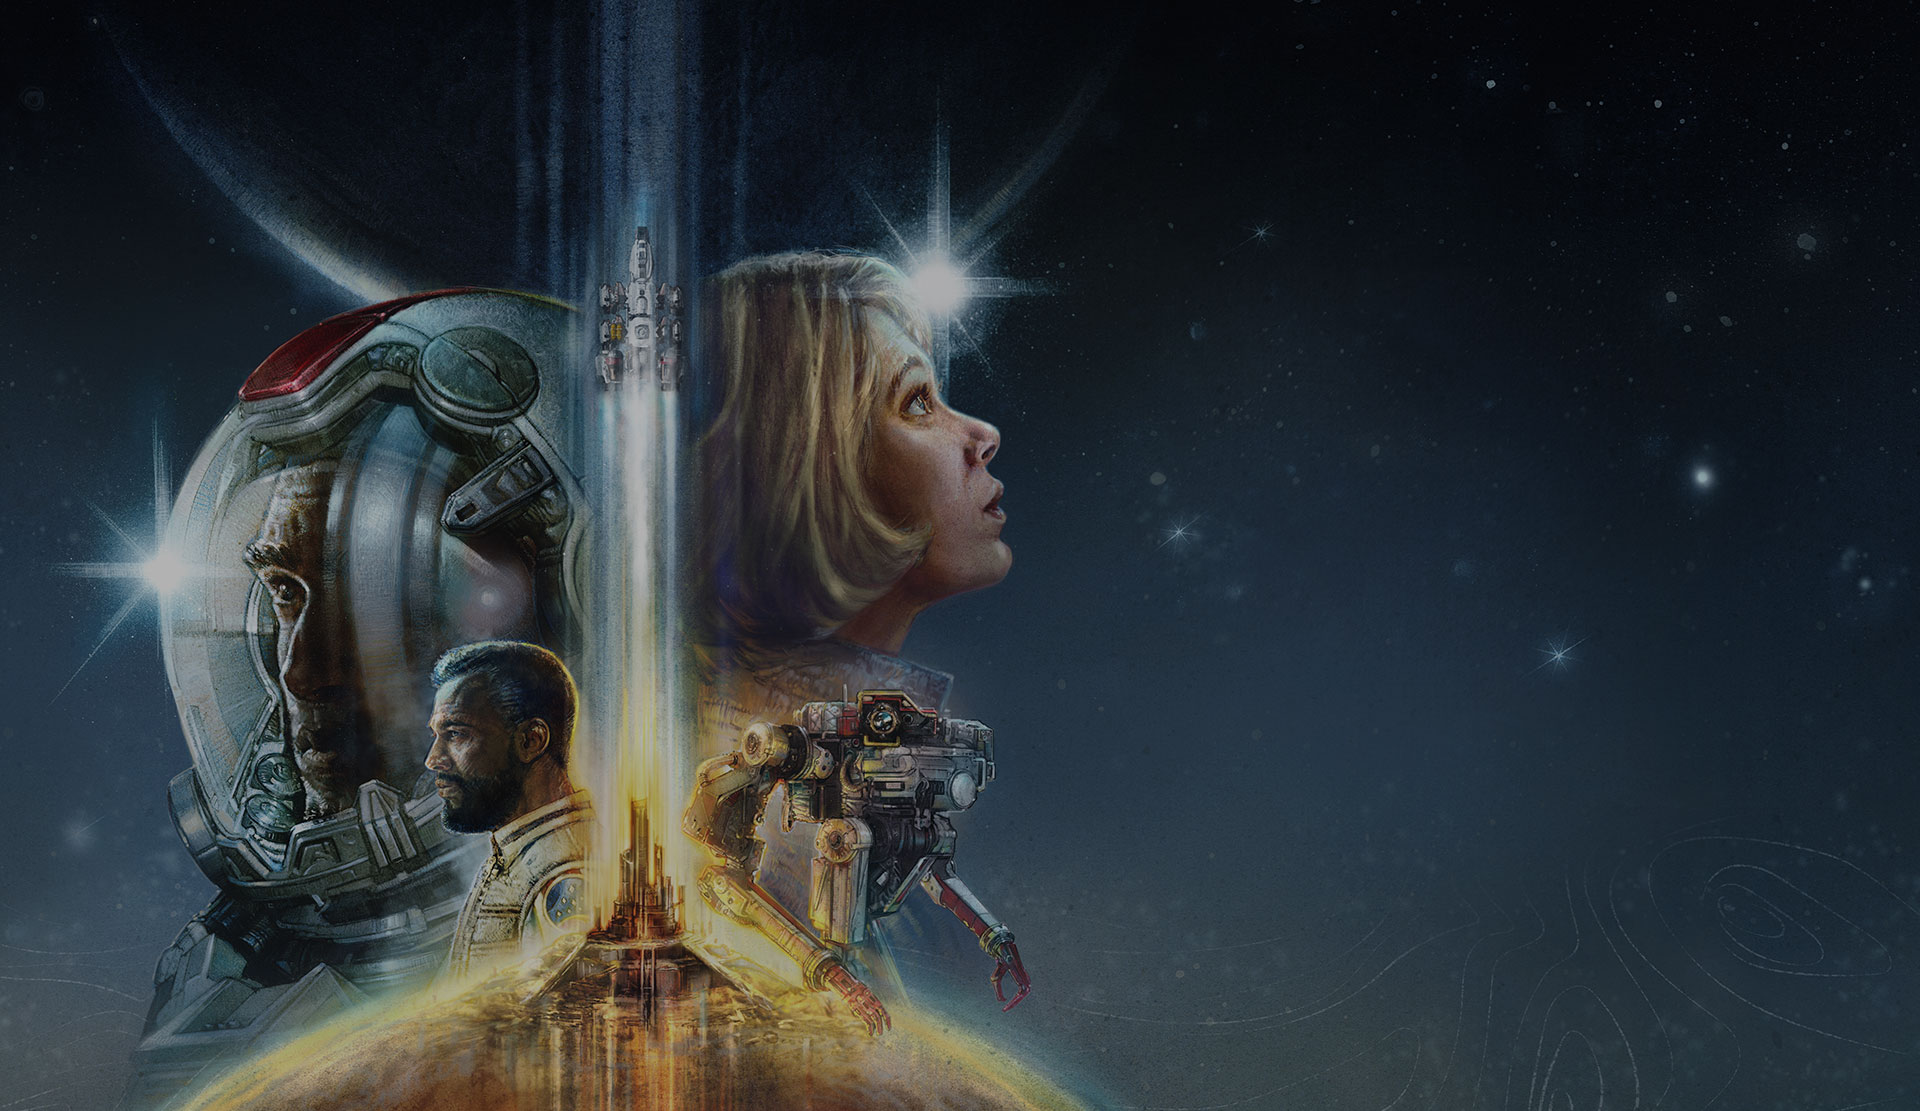 Starfield. Four characters superimposed facing to the left and right side with a rocket ship taking off in the middle with a space background.